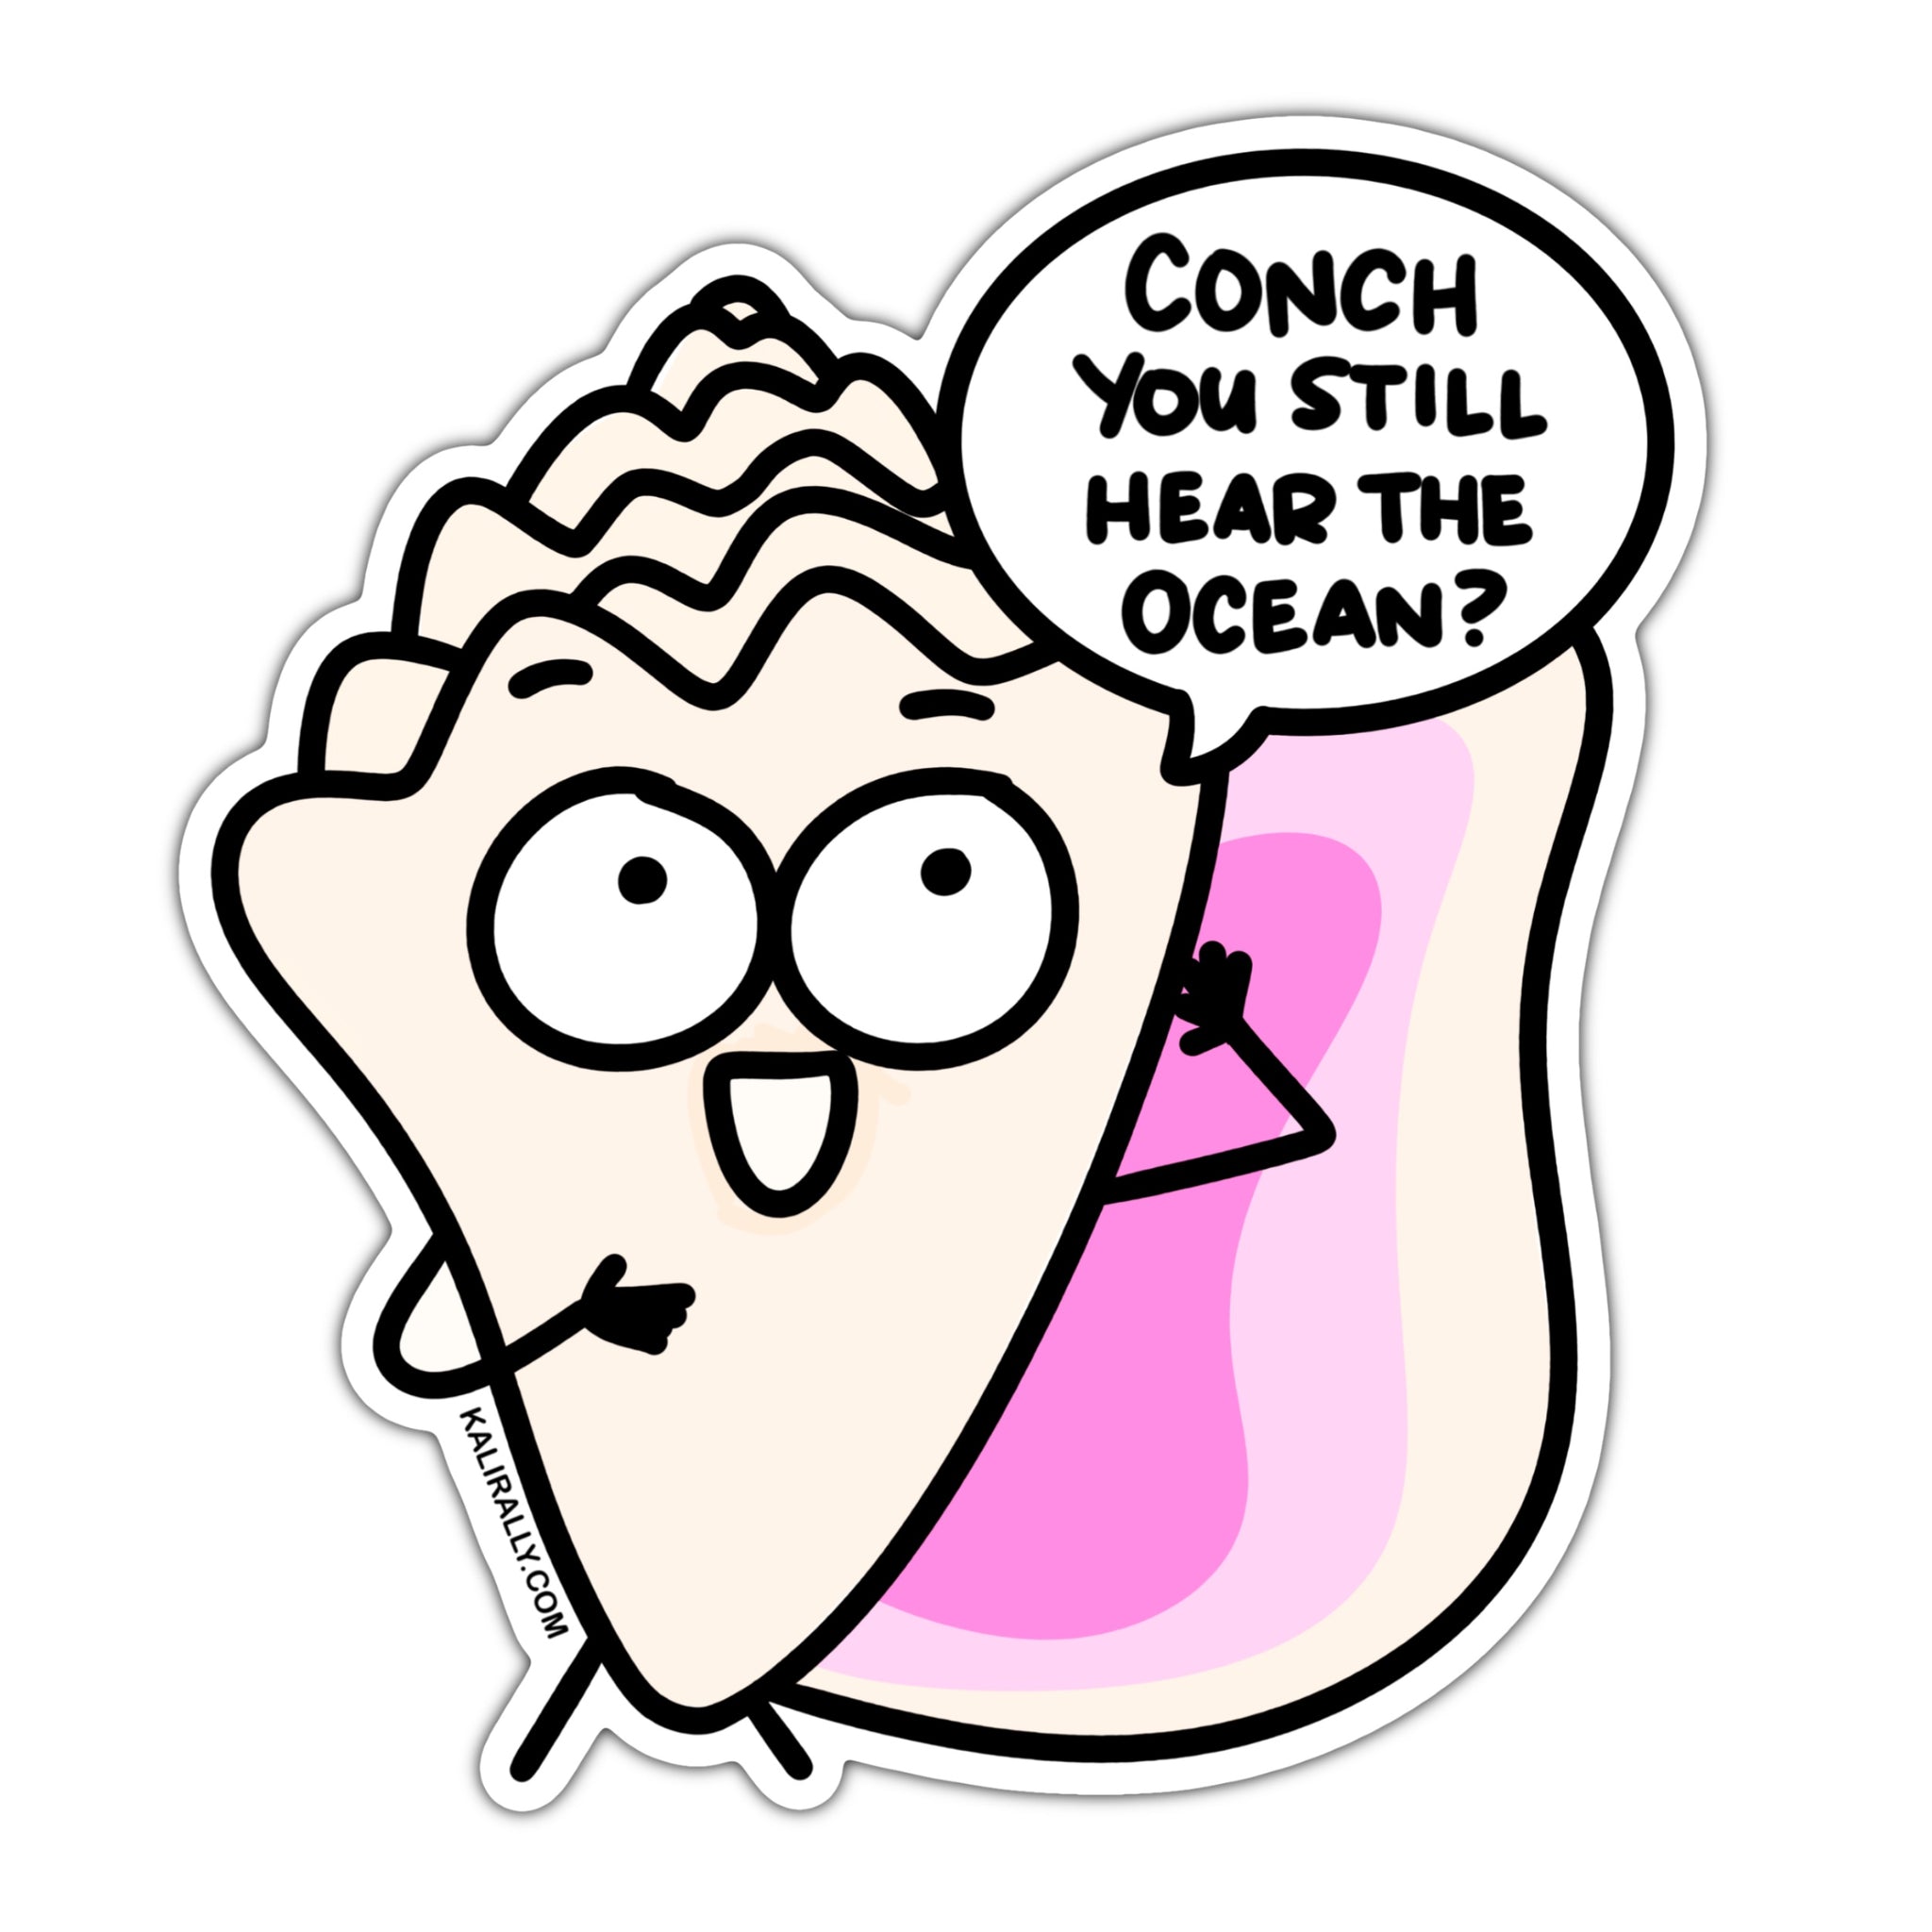 Punny Conch Shell Sticker, Conch you still hear the ocean? Decal